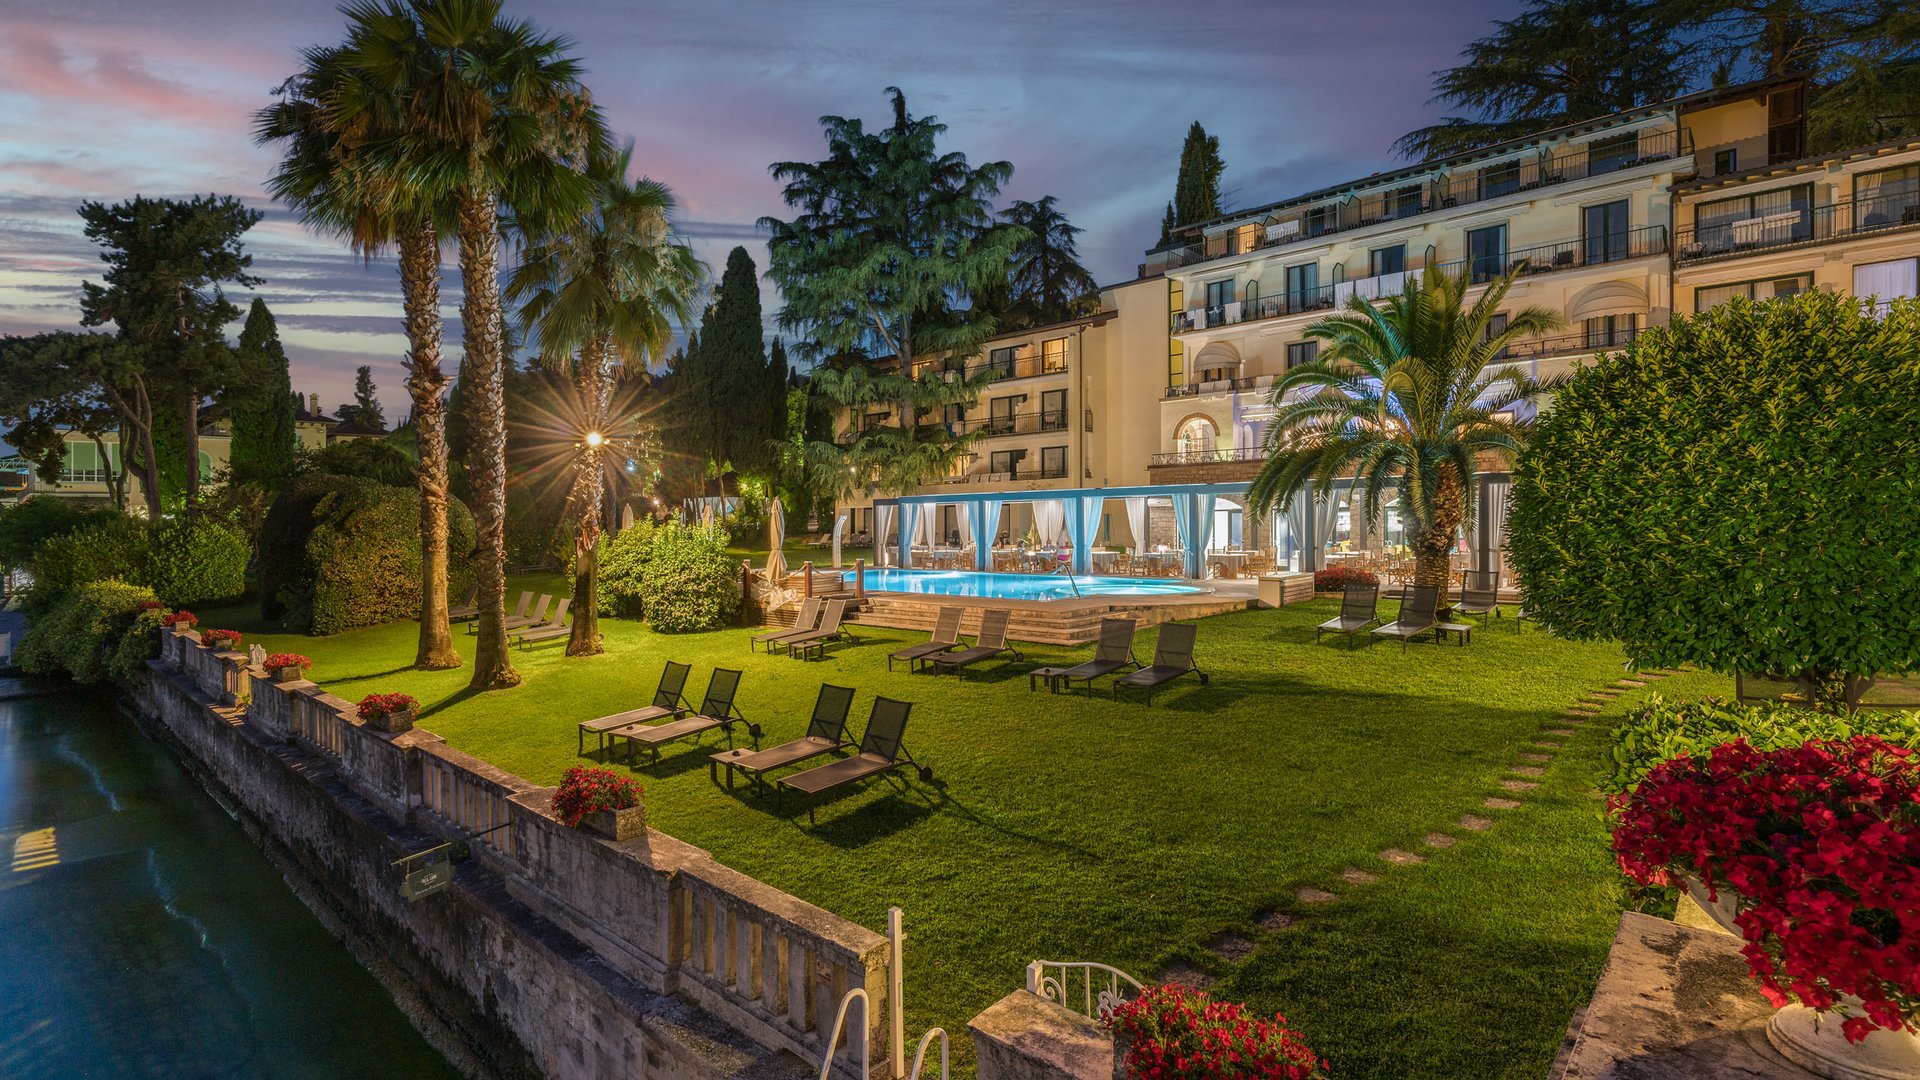 What guests are saying about Villa Capri